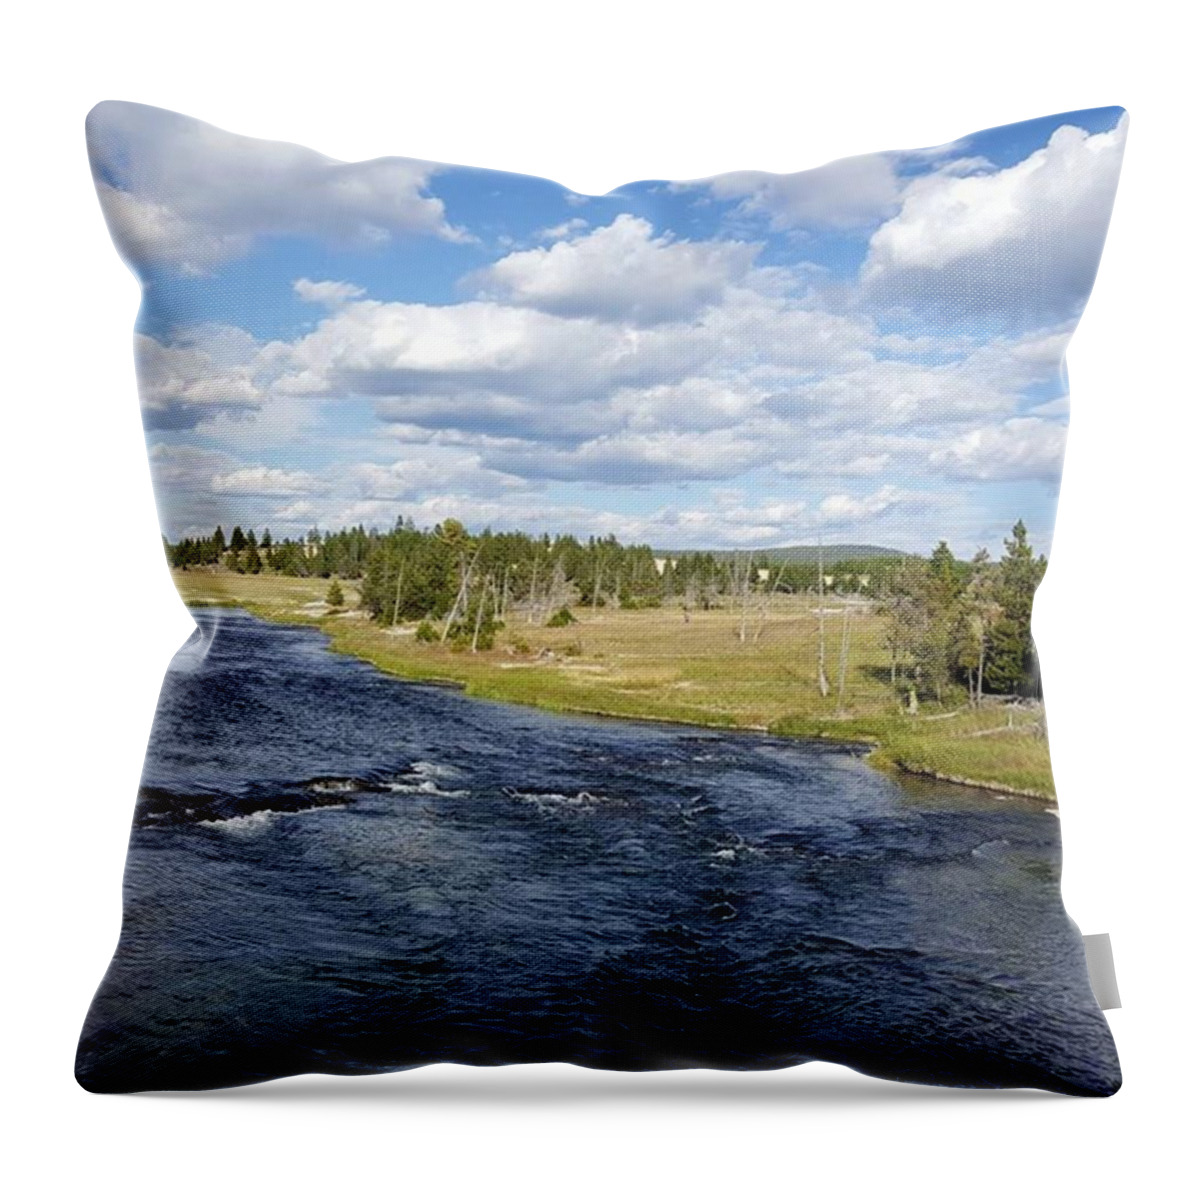 Clouds Throw Pillow featuring the photograph Firehole River by Viviana Rueda